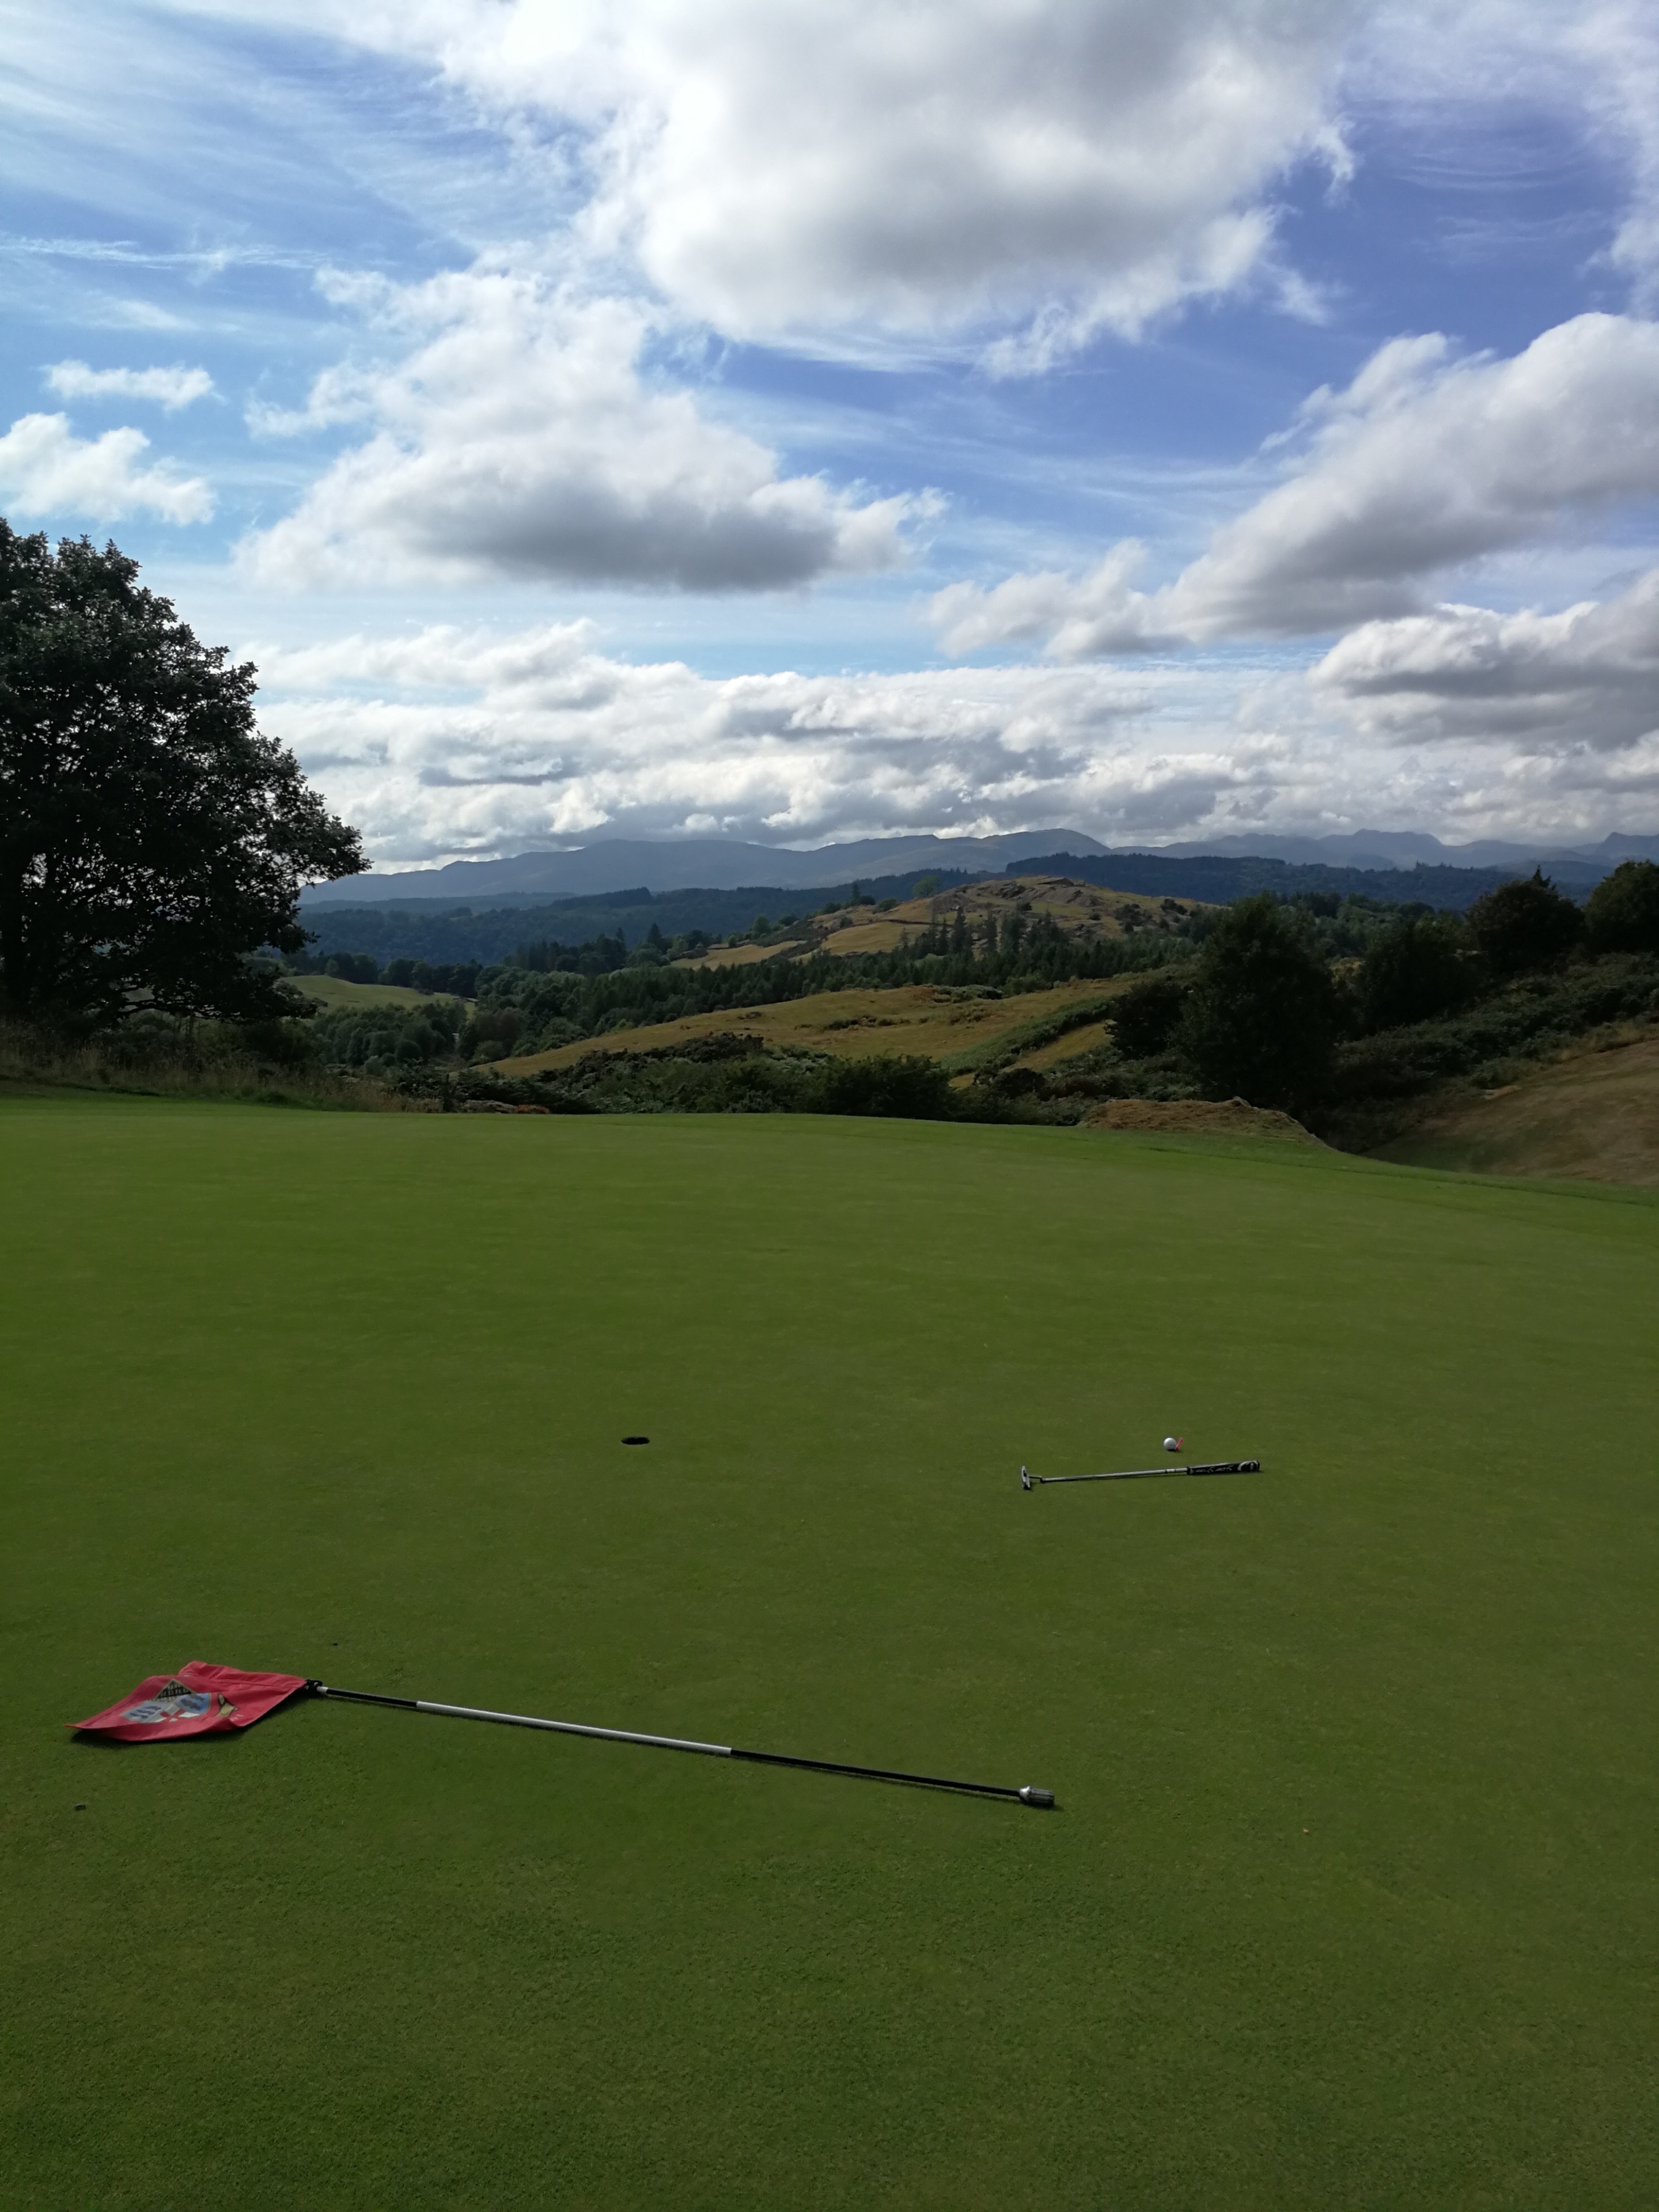 Golf after Market Visits! Man I'm lucky to account manage such an incredible place #lakedistrict